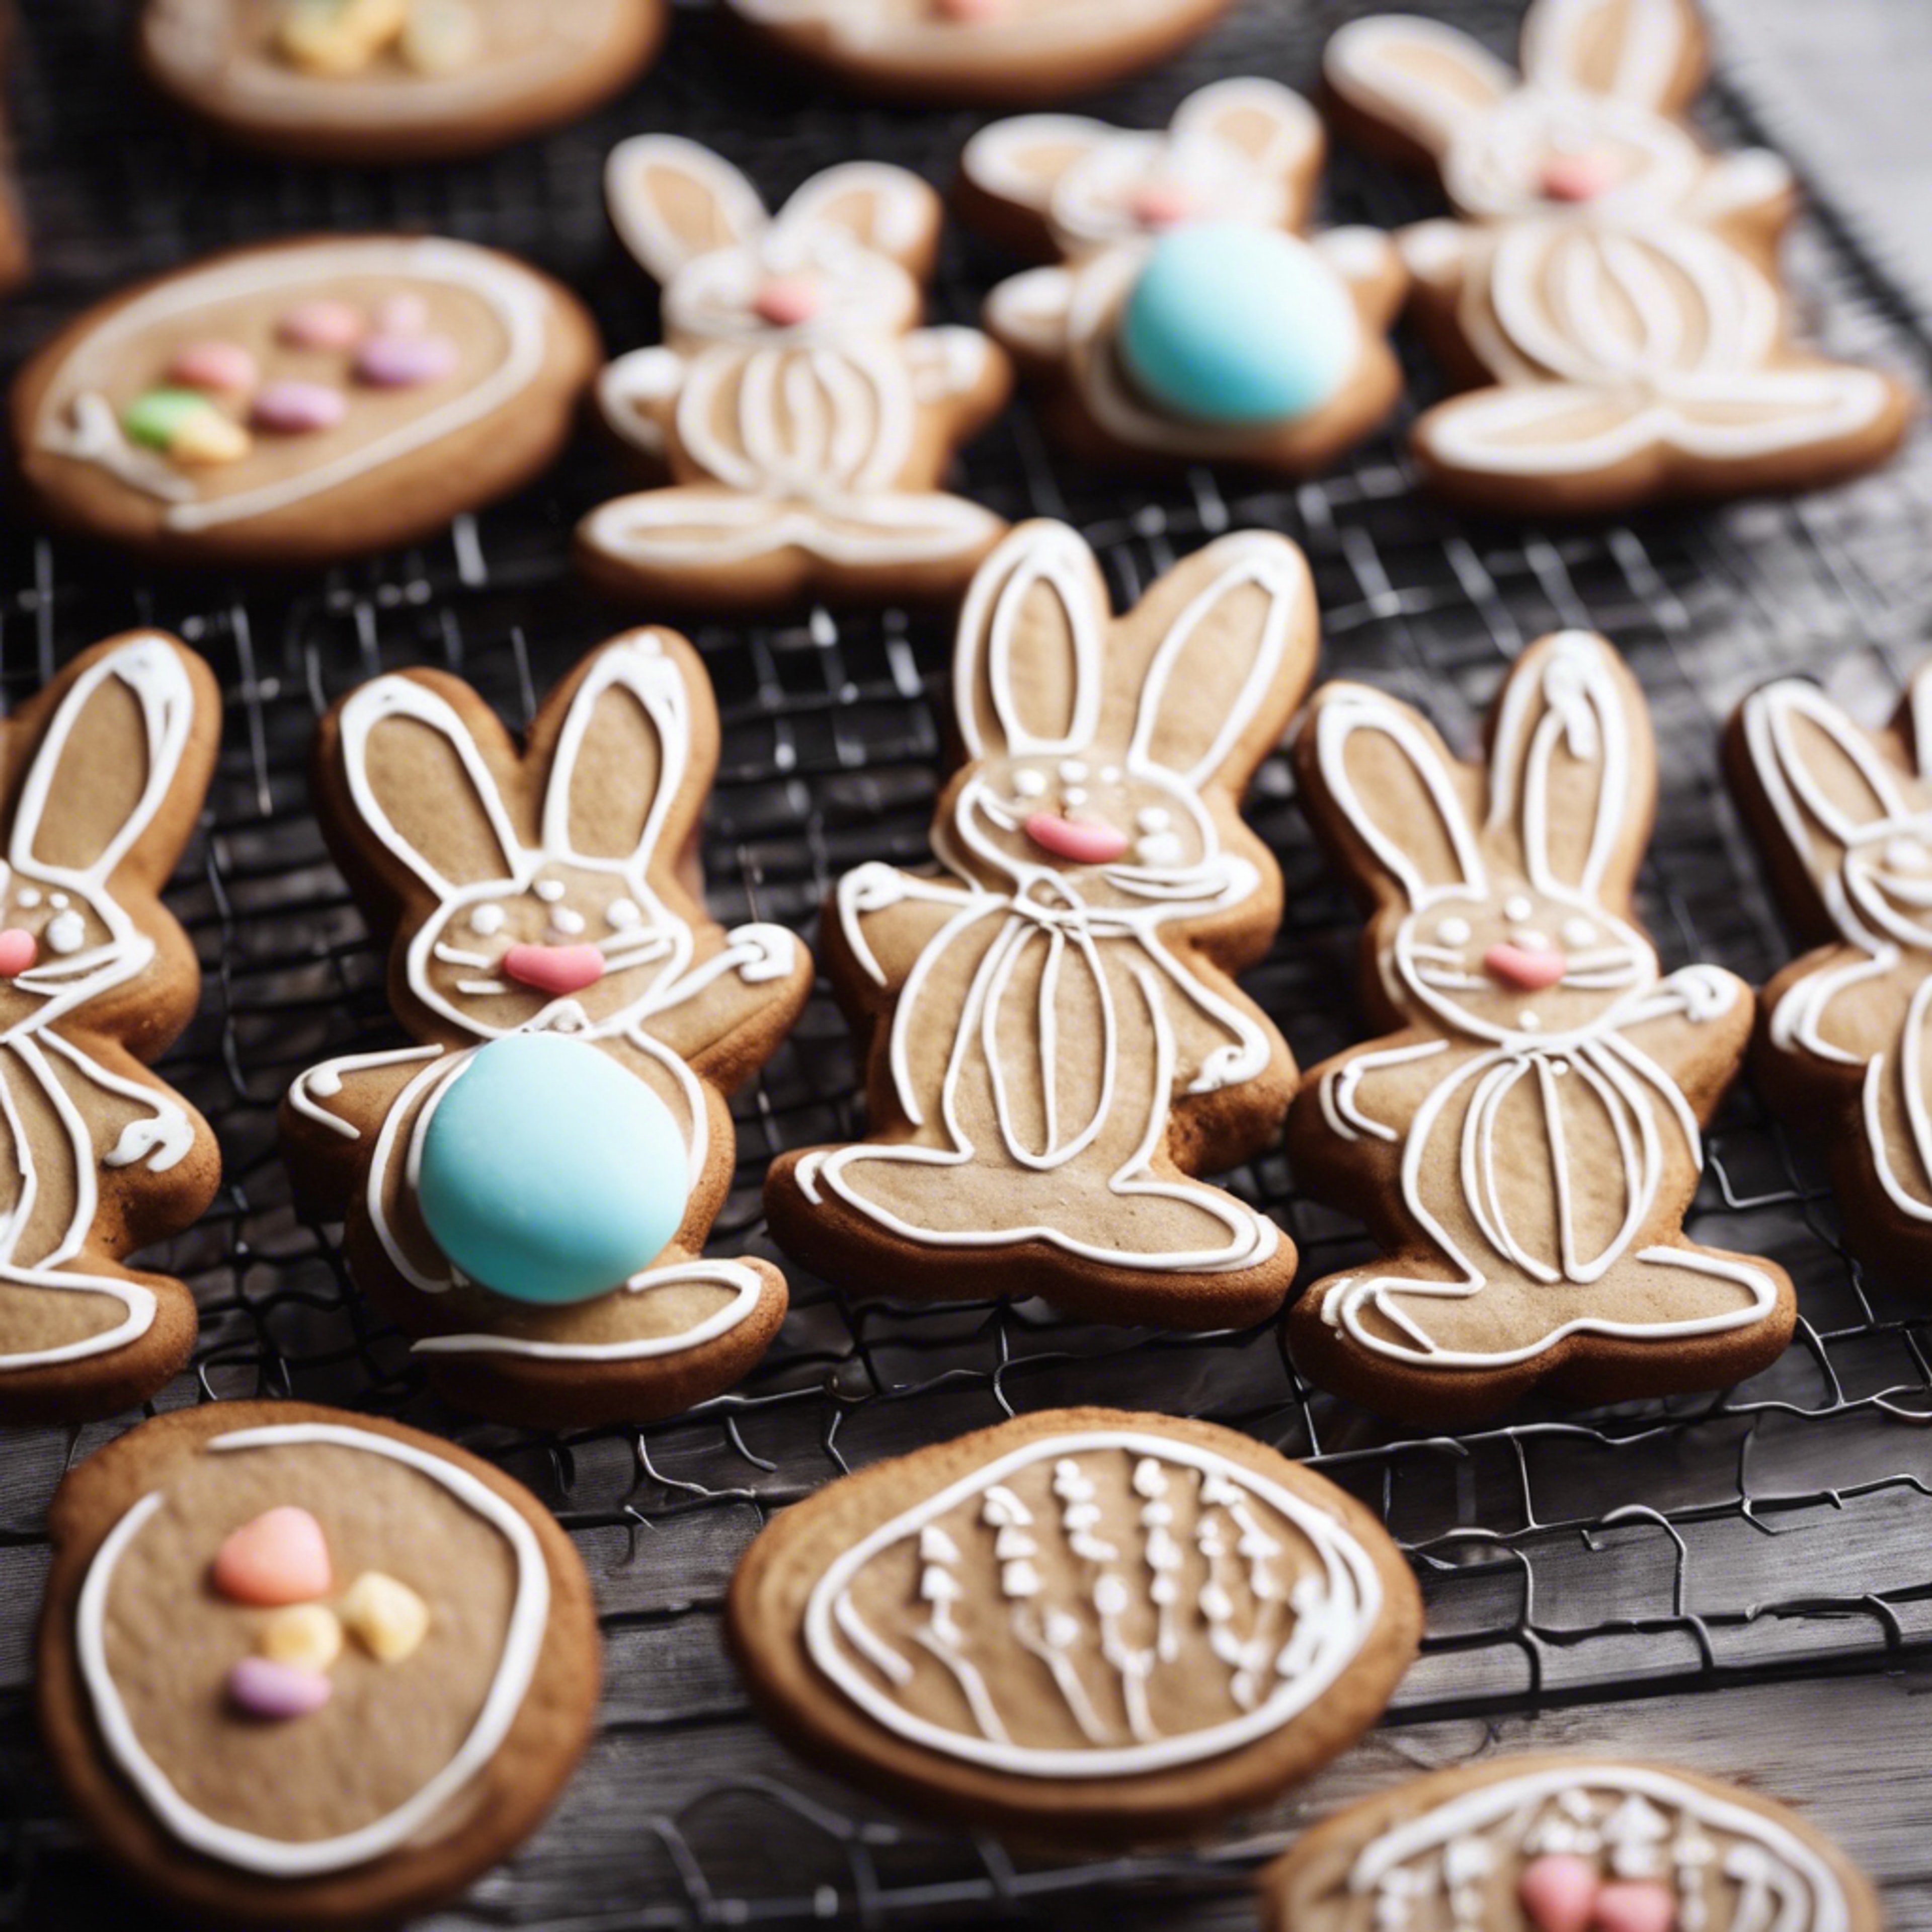 Homemade gingerbread cookies shaped like Easter bunnies and eggs, cooling on a rack. Tapeta[c62694eb033d400aa62f]